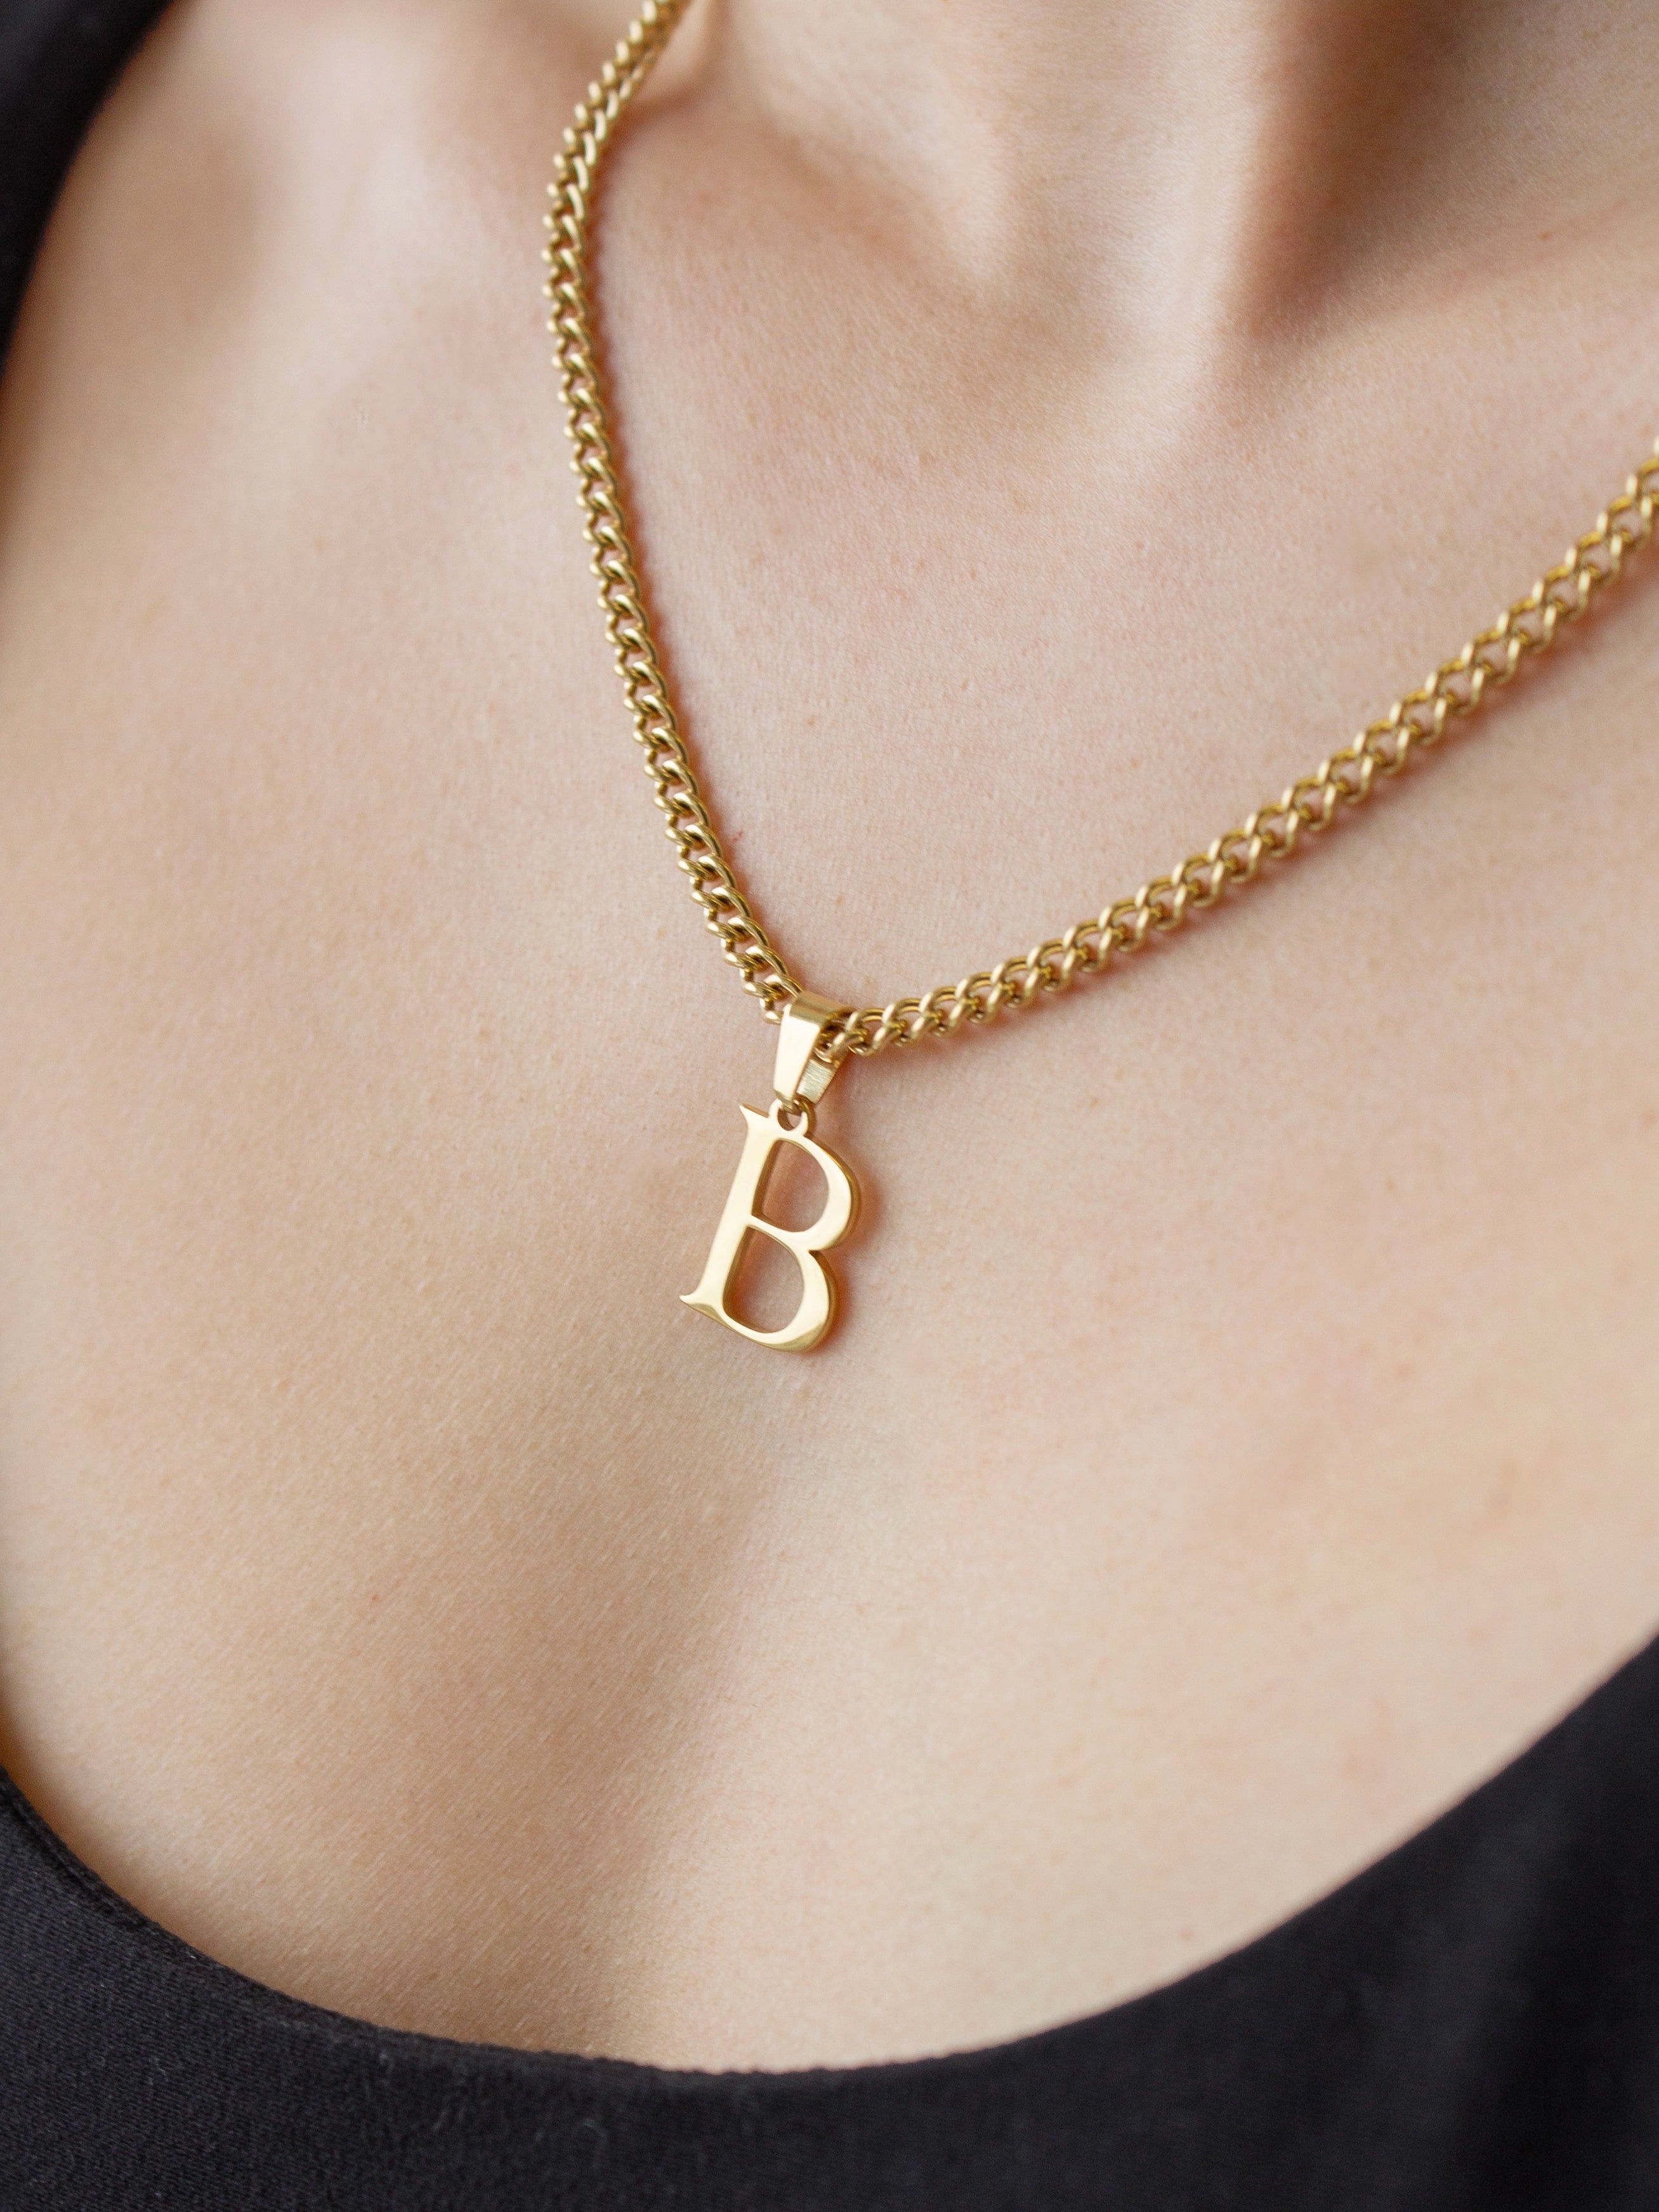 Chloee Initial Necklace | Victoria Emerson